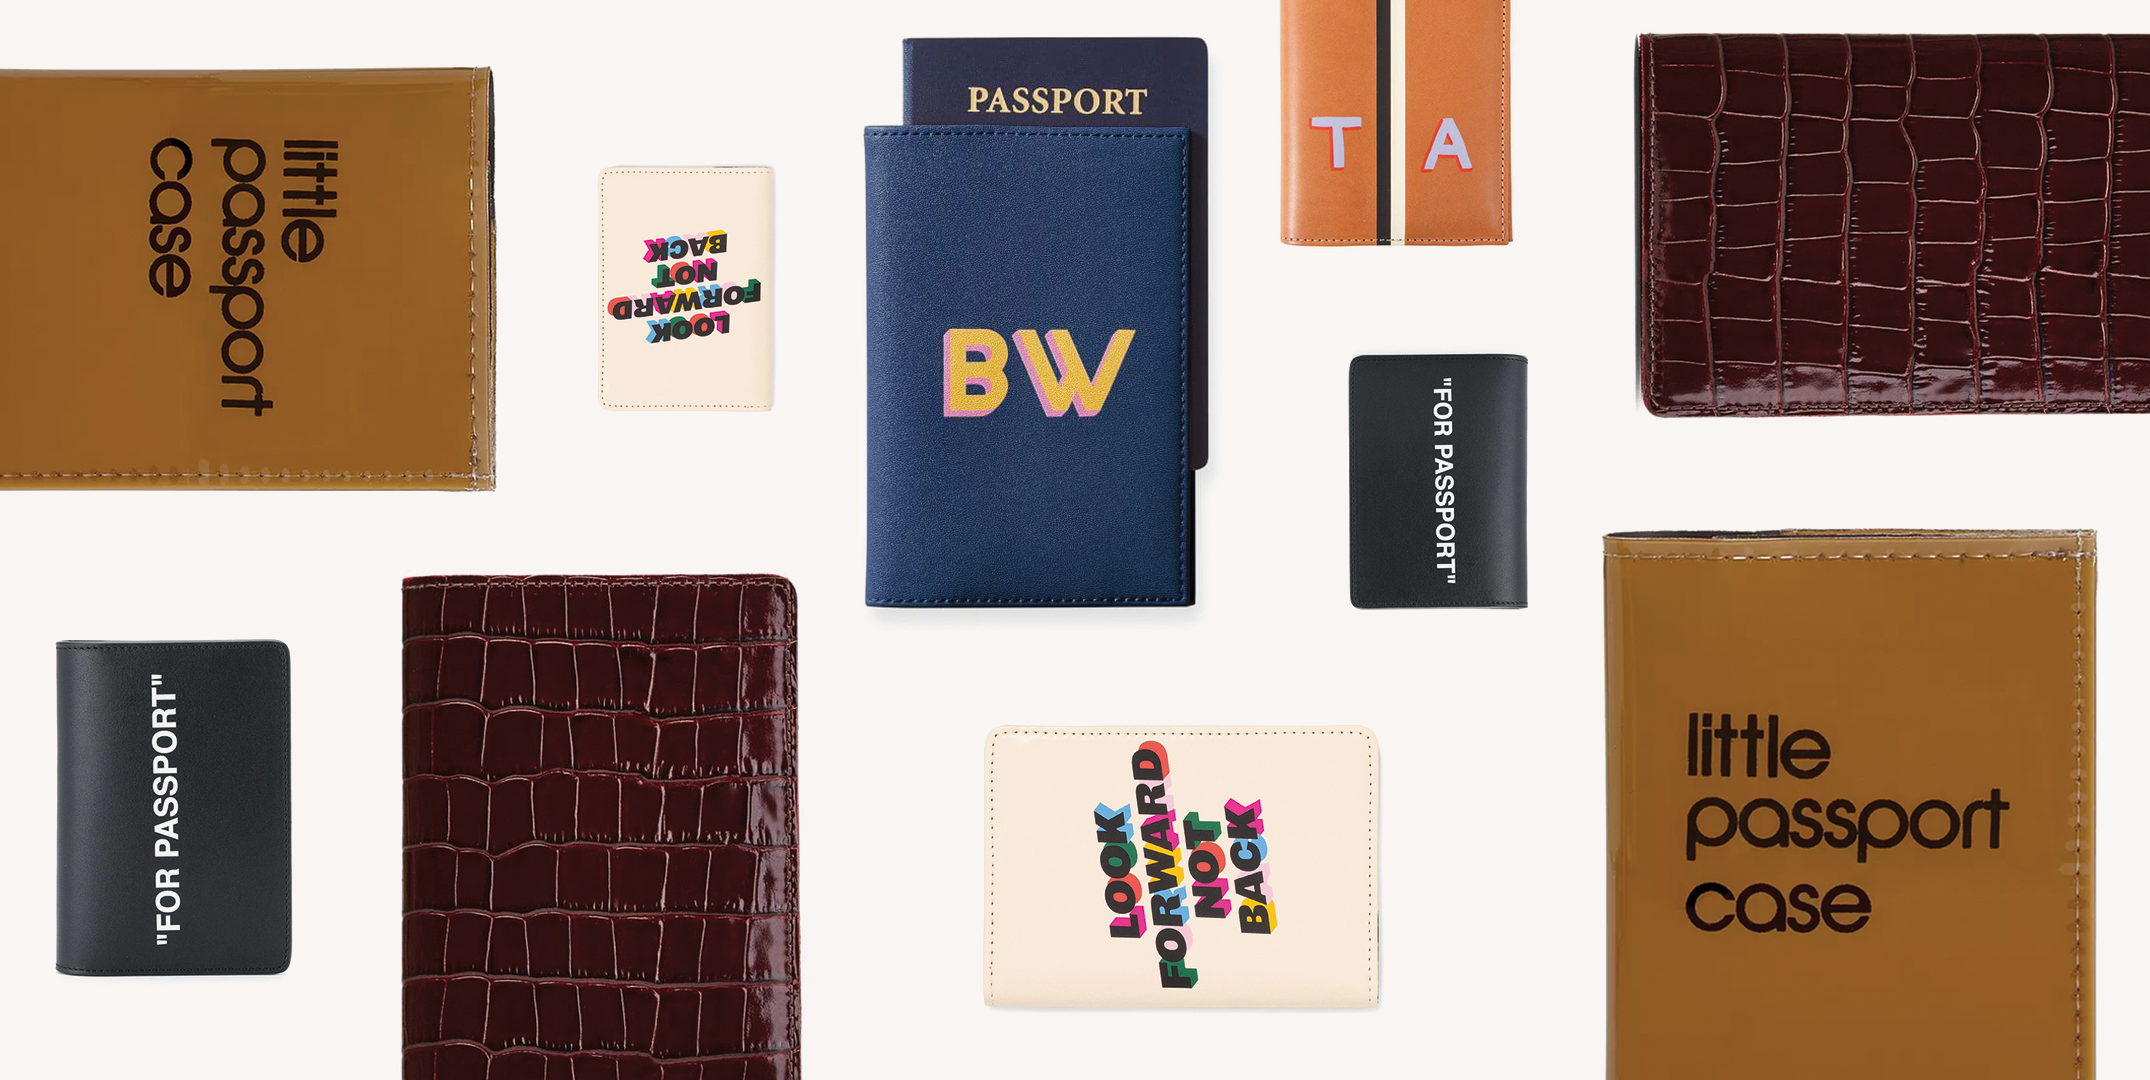 Meow! Travel in style with this designer passport holder